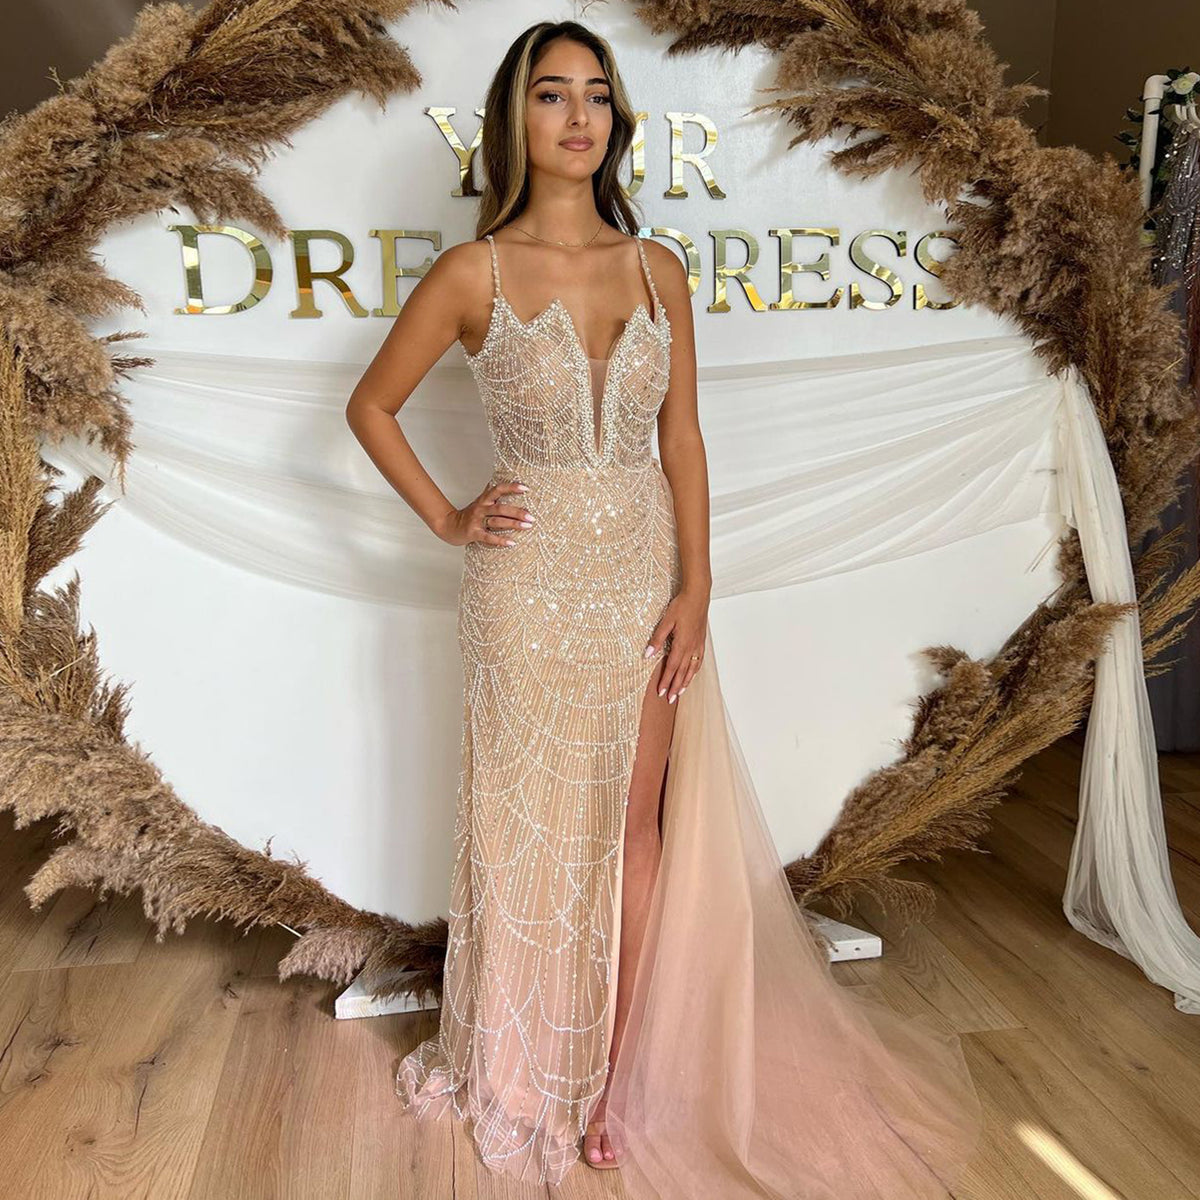 Sharon Said Luxury Nude Spaghetti Straps Mermaid Arabic Long Evening Dress with High Slit Overskirt for Wedding Party Gown SS311